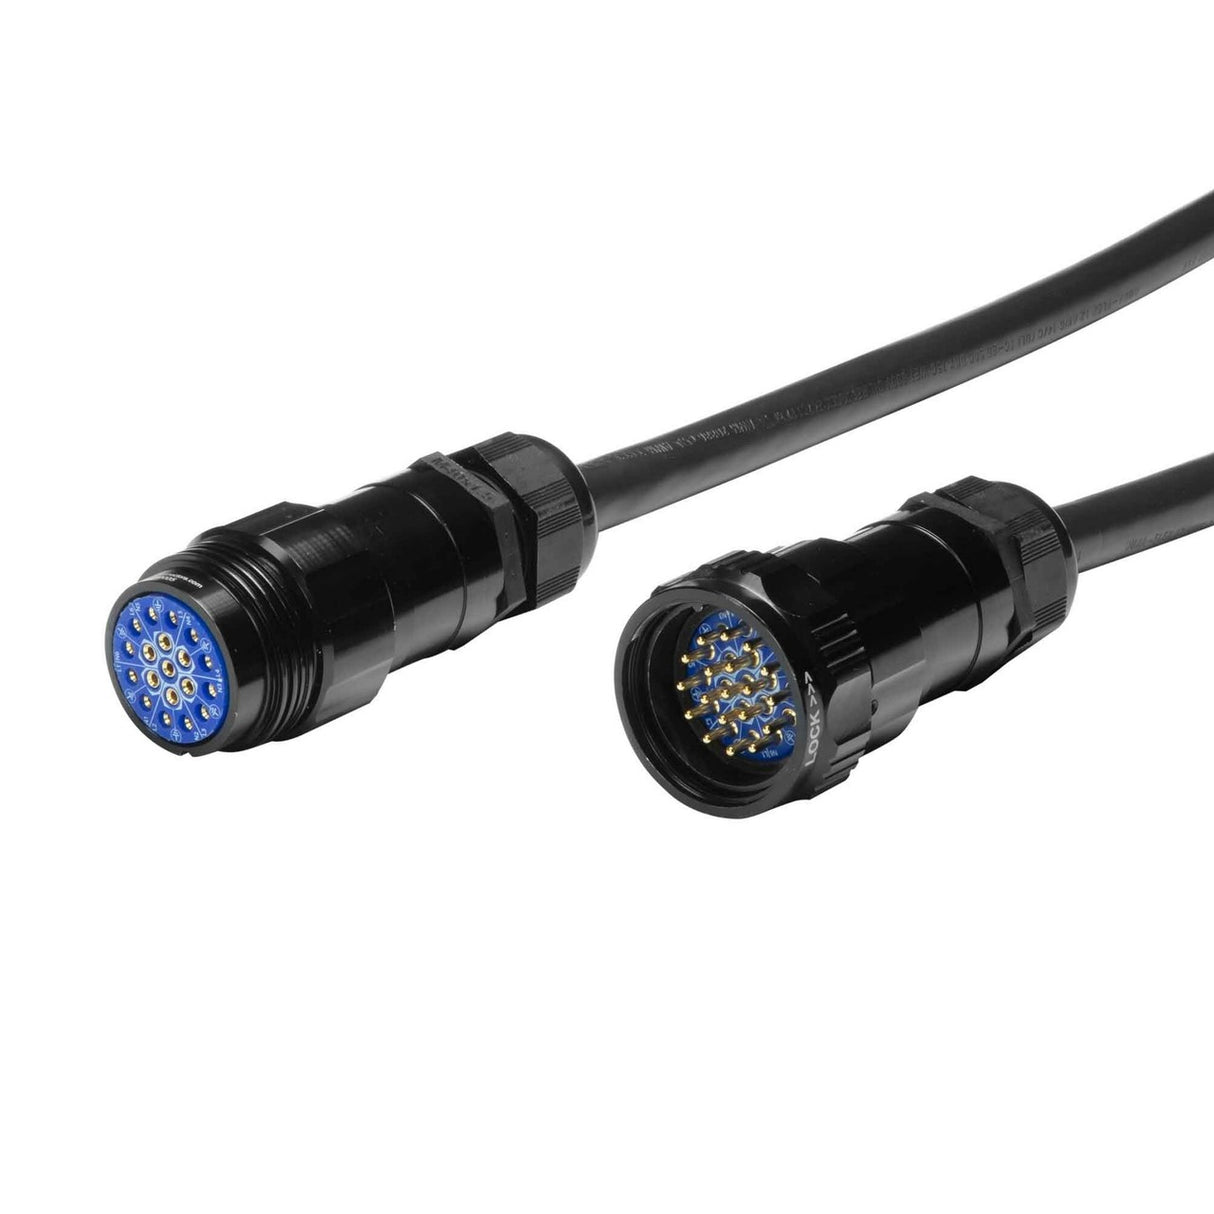 Elite Core 19 Pin Soco Extension Male to Female Lighting Power Cable with Standard Connector, 200 Foot